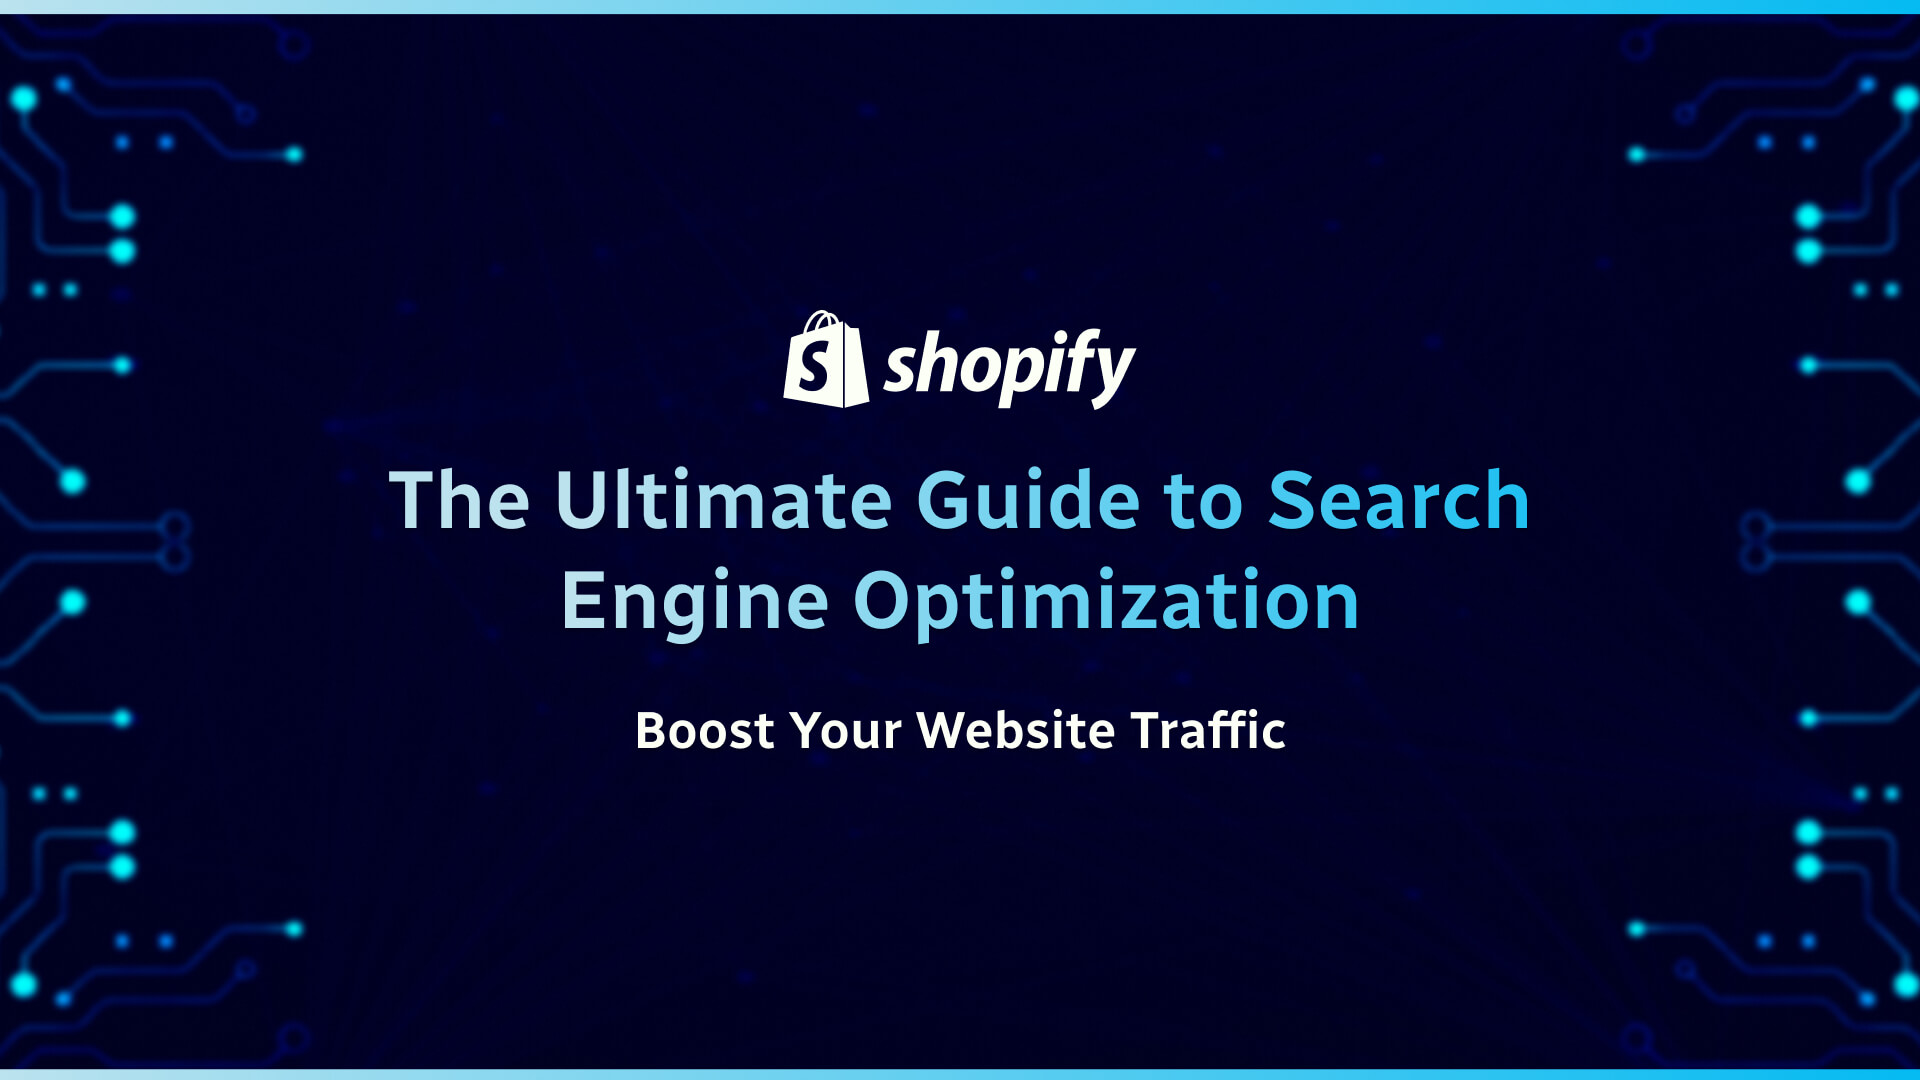 The Ultimate Guide to Search Engine Optimization_ Boost Your Website Traffic (1)